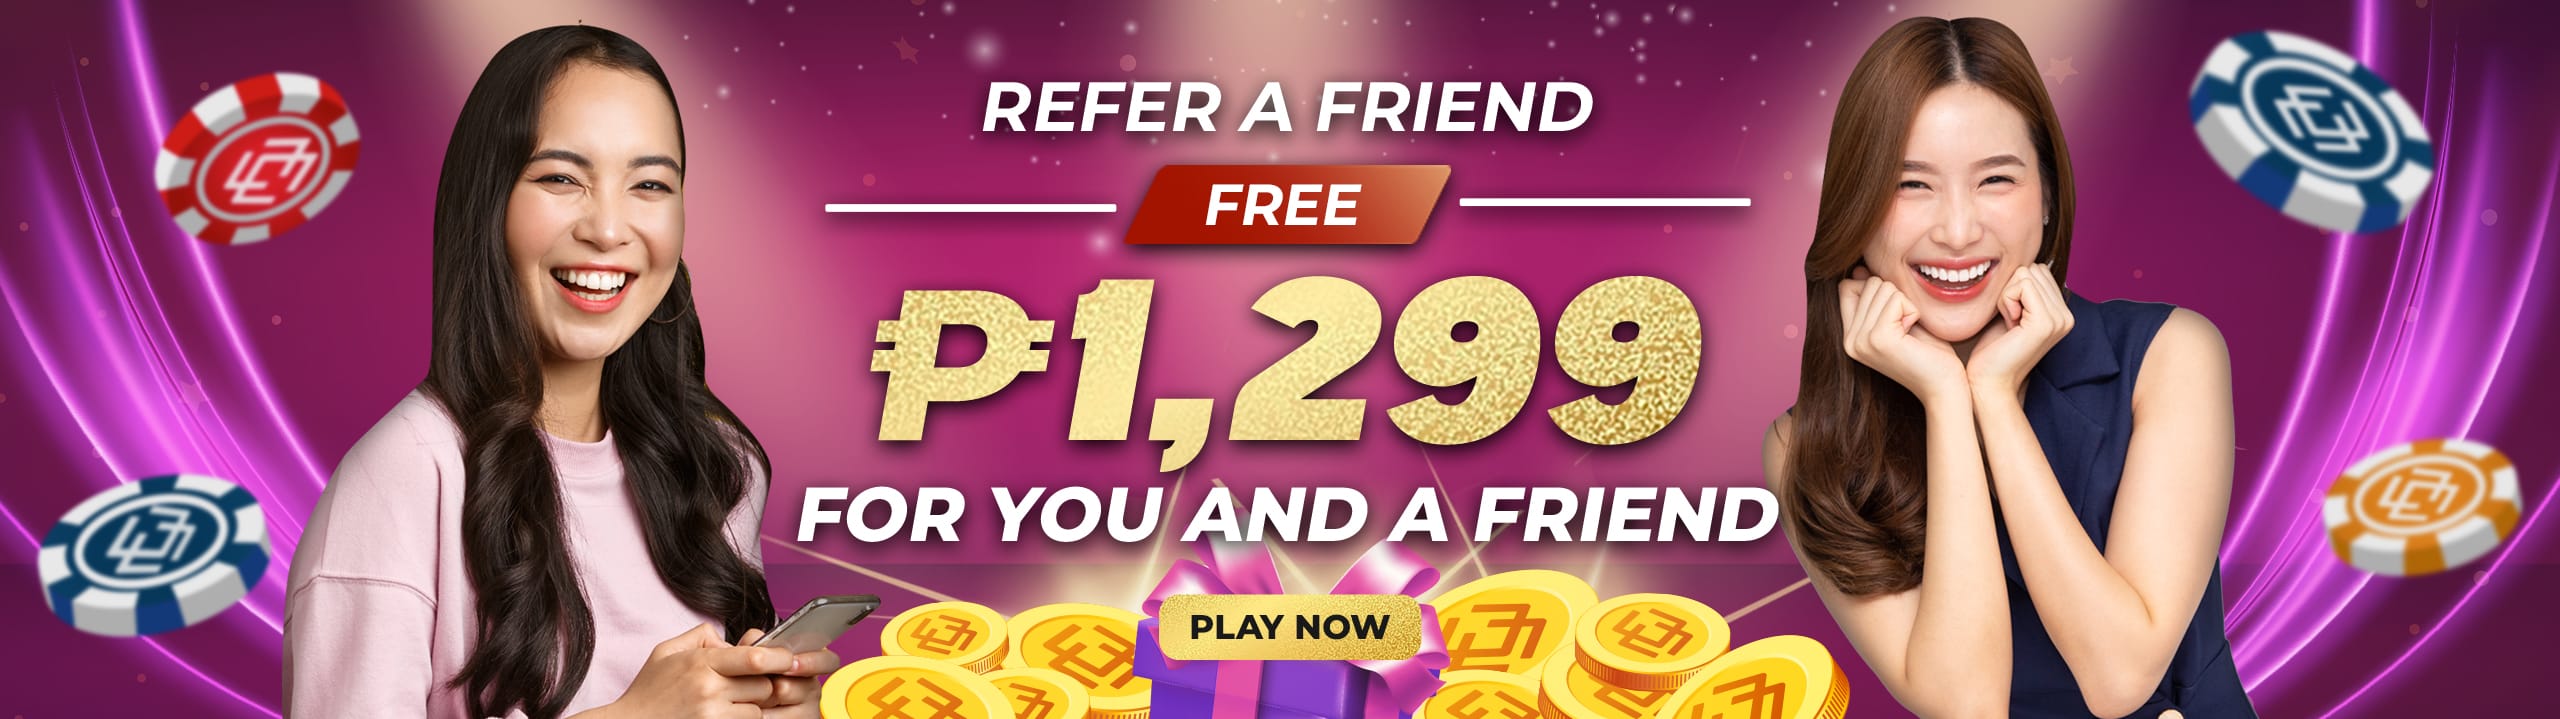 Refer A friend and get Free 1,299 PHP for you and A friend